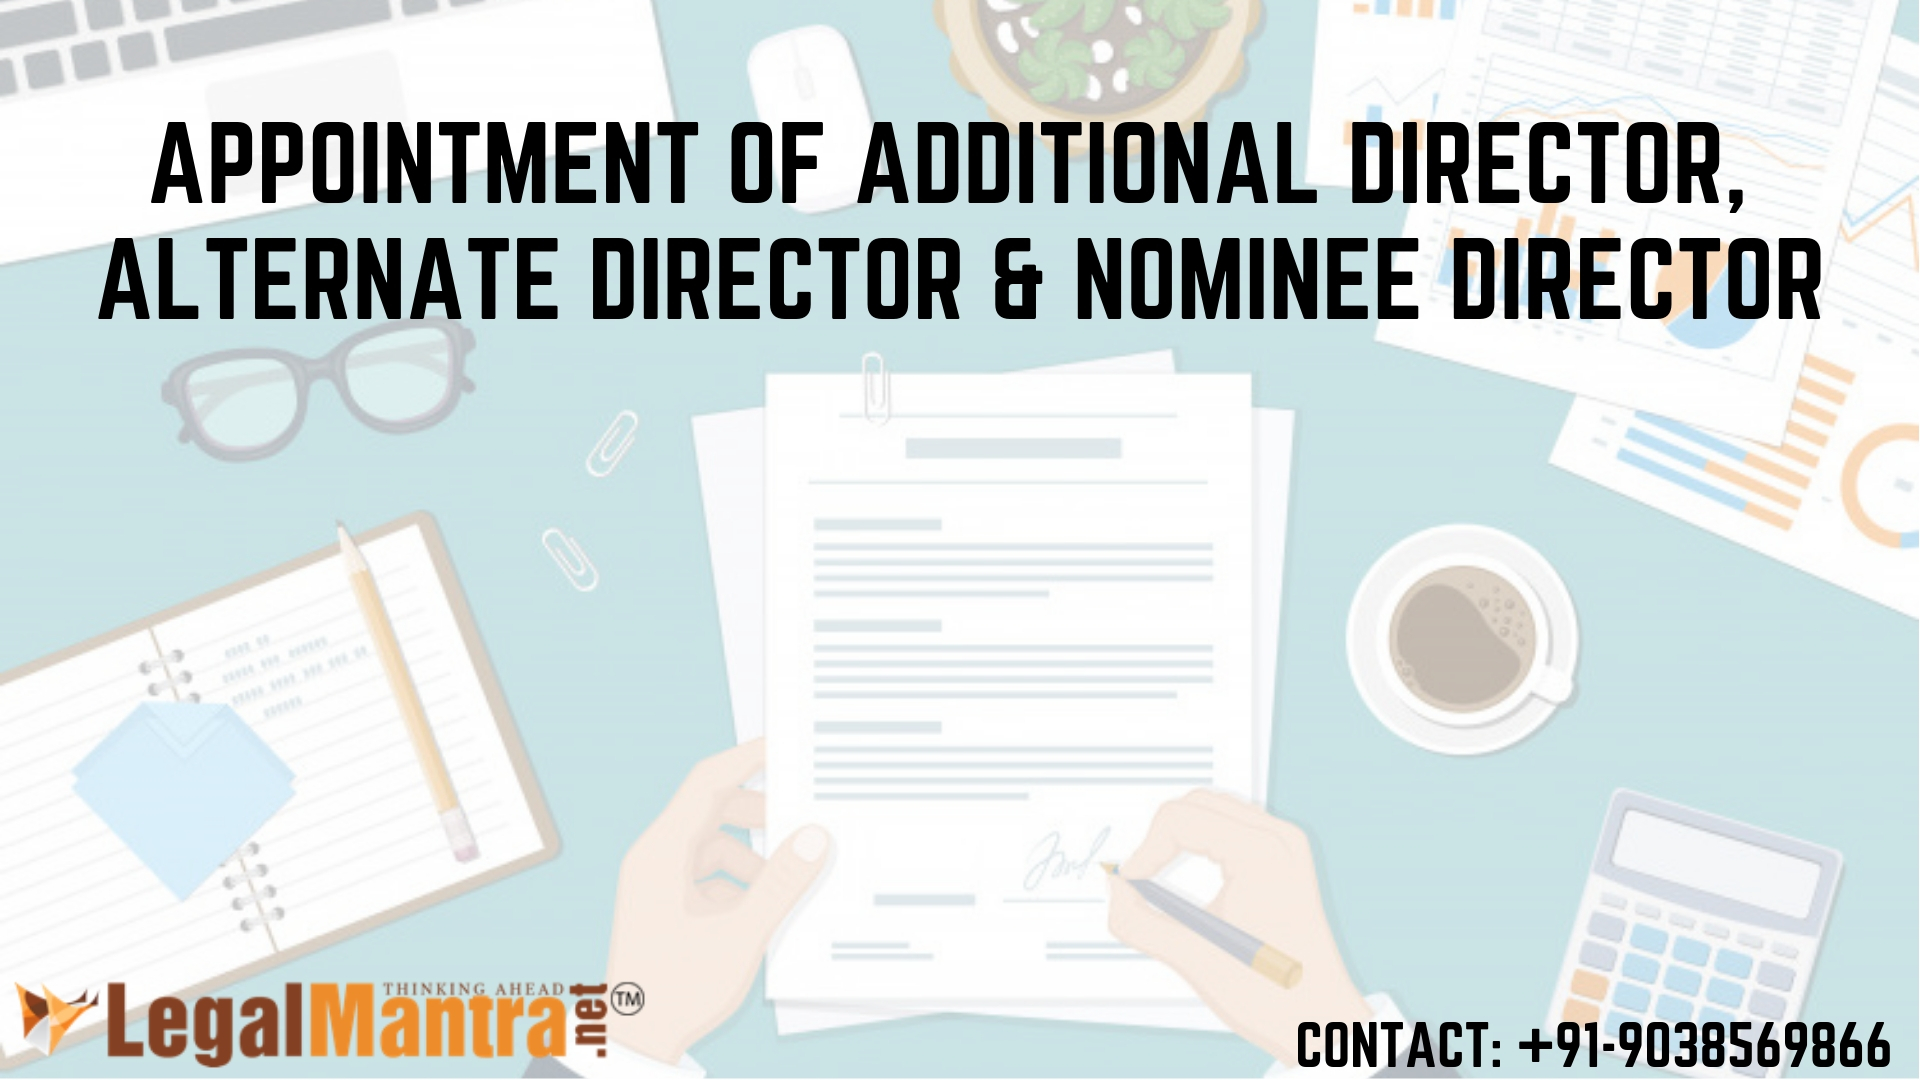 Appointment of Additional Director 